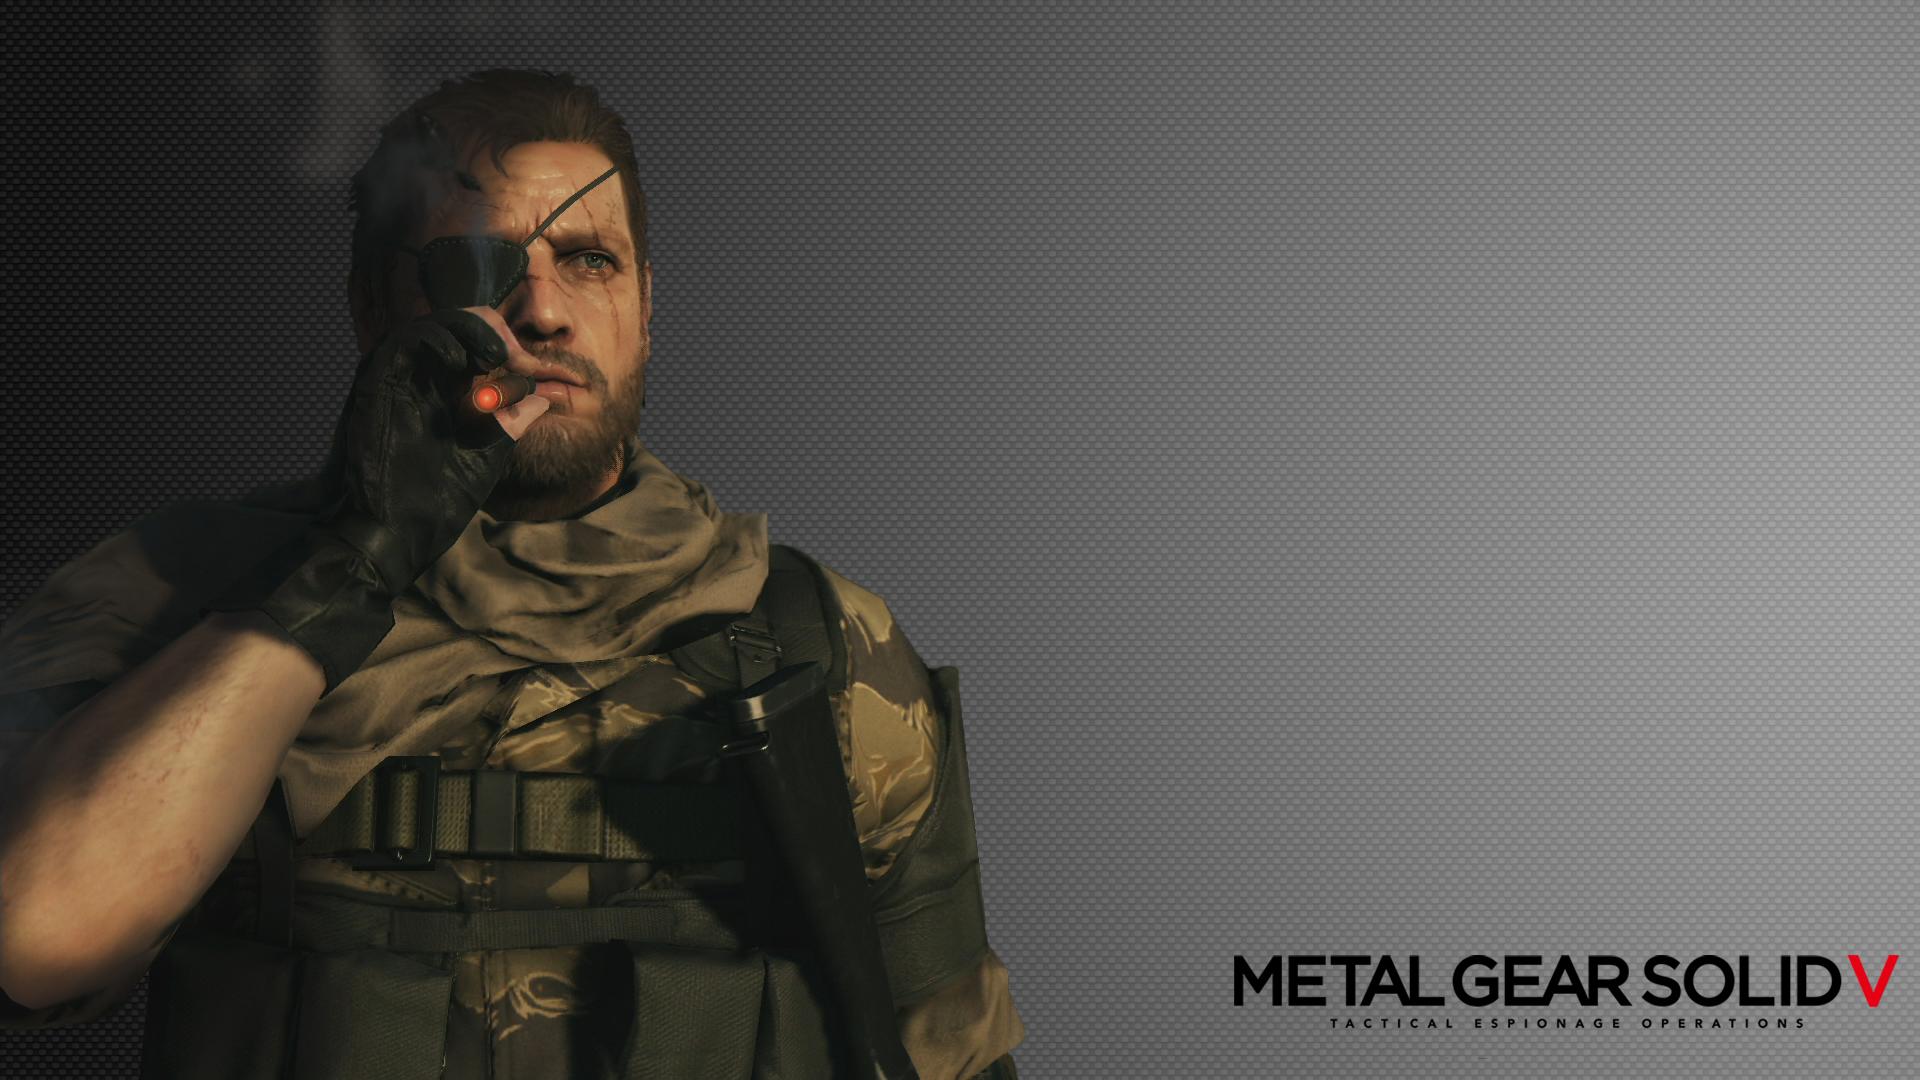 I thought I'd share this MGS5 Wallpaper I put together